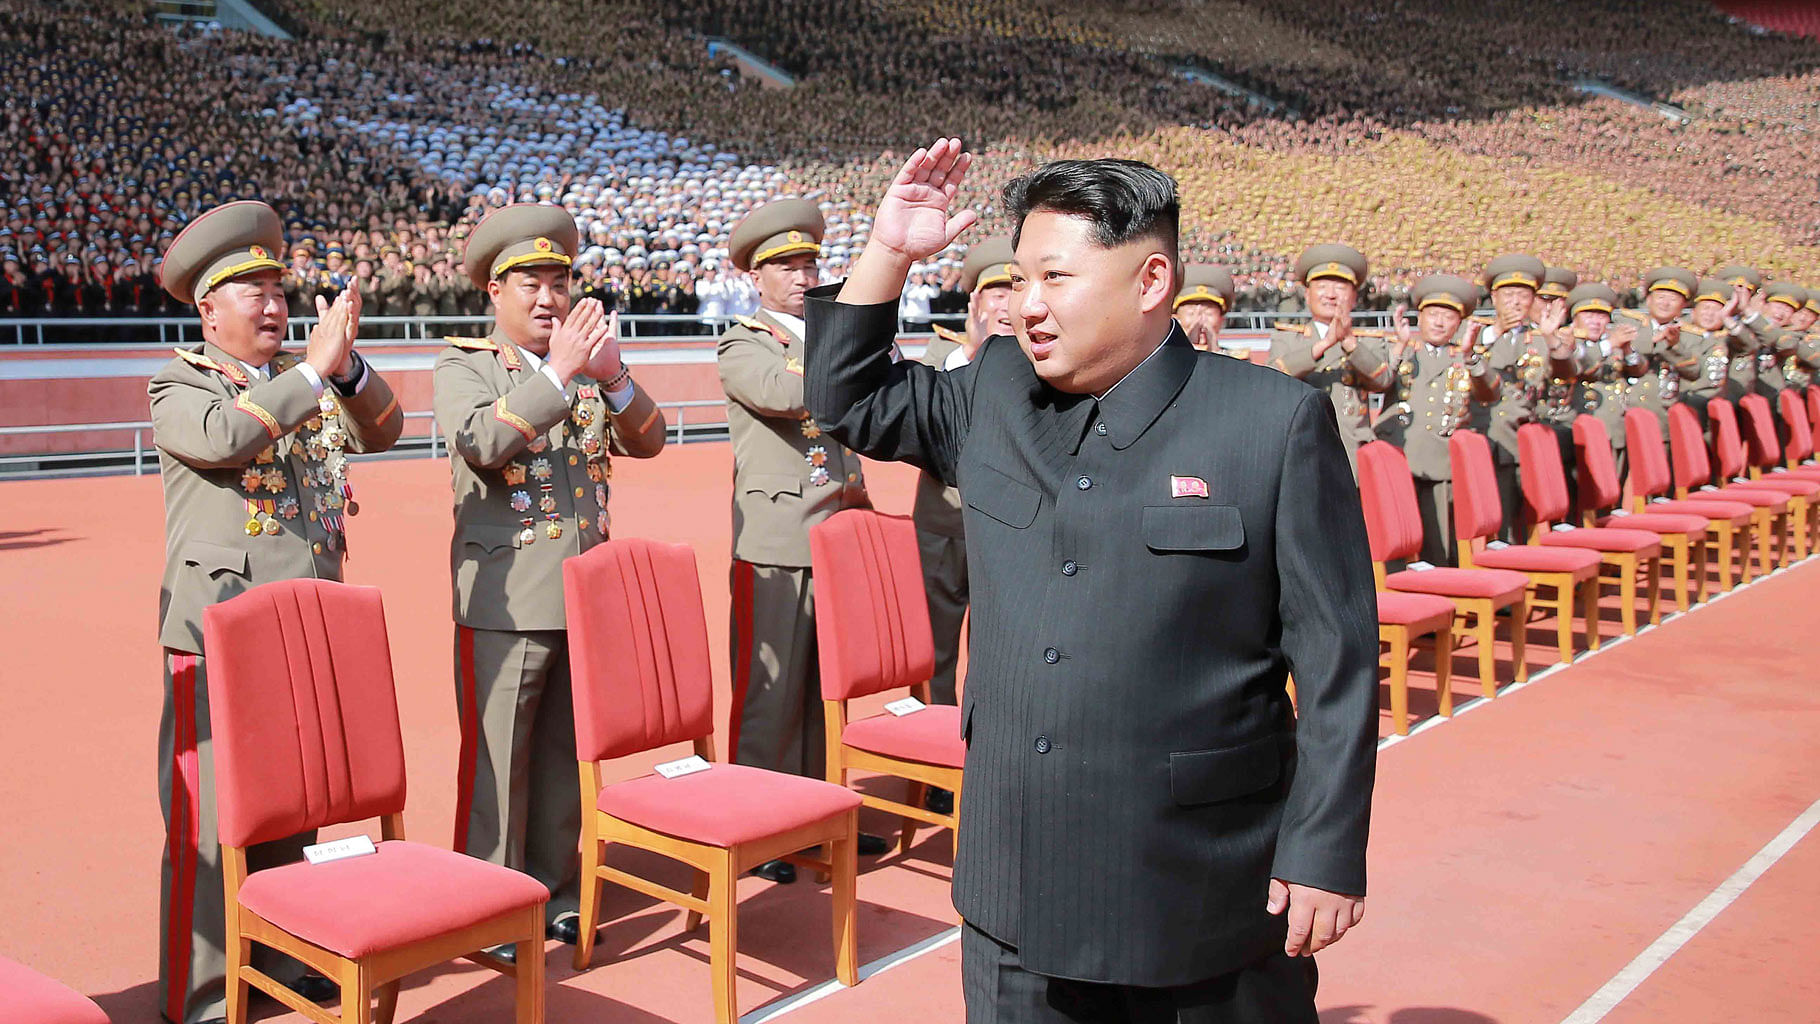 Kim Jong Un may face a probe for alleged crimes against humanity. (Photo: IANS/Xinhua)